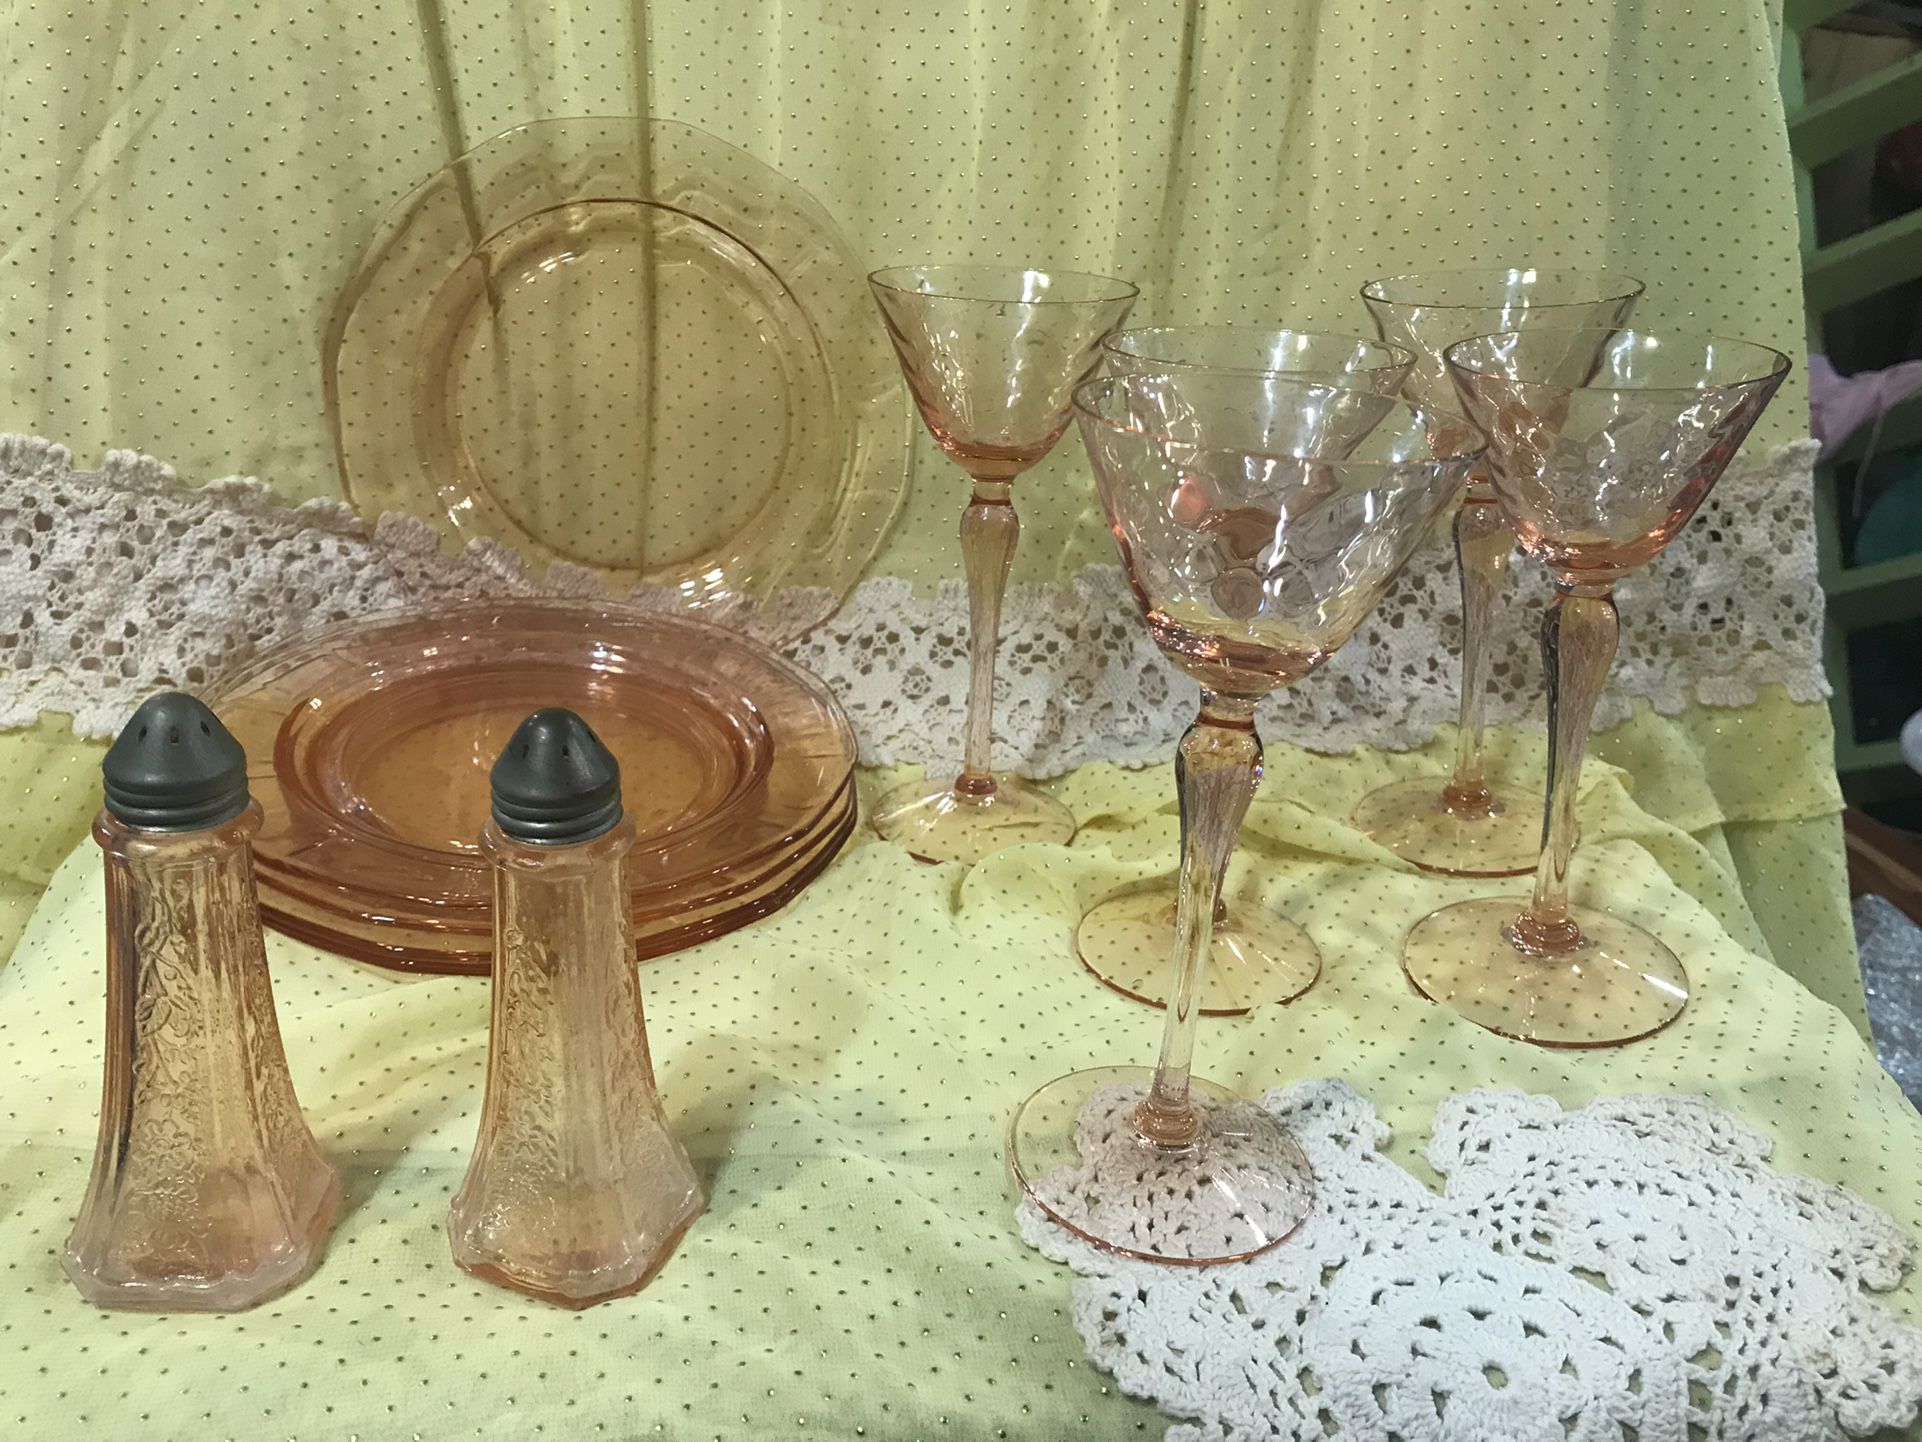 MidCentury And Antique Vanity And Depression Glass Items